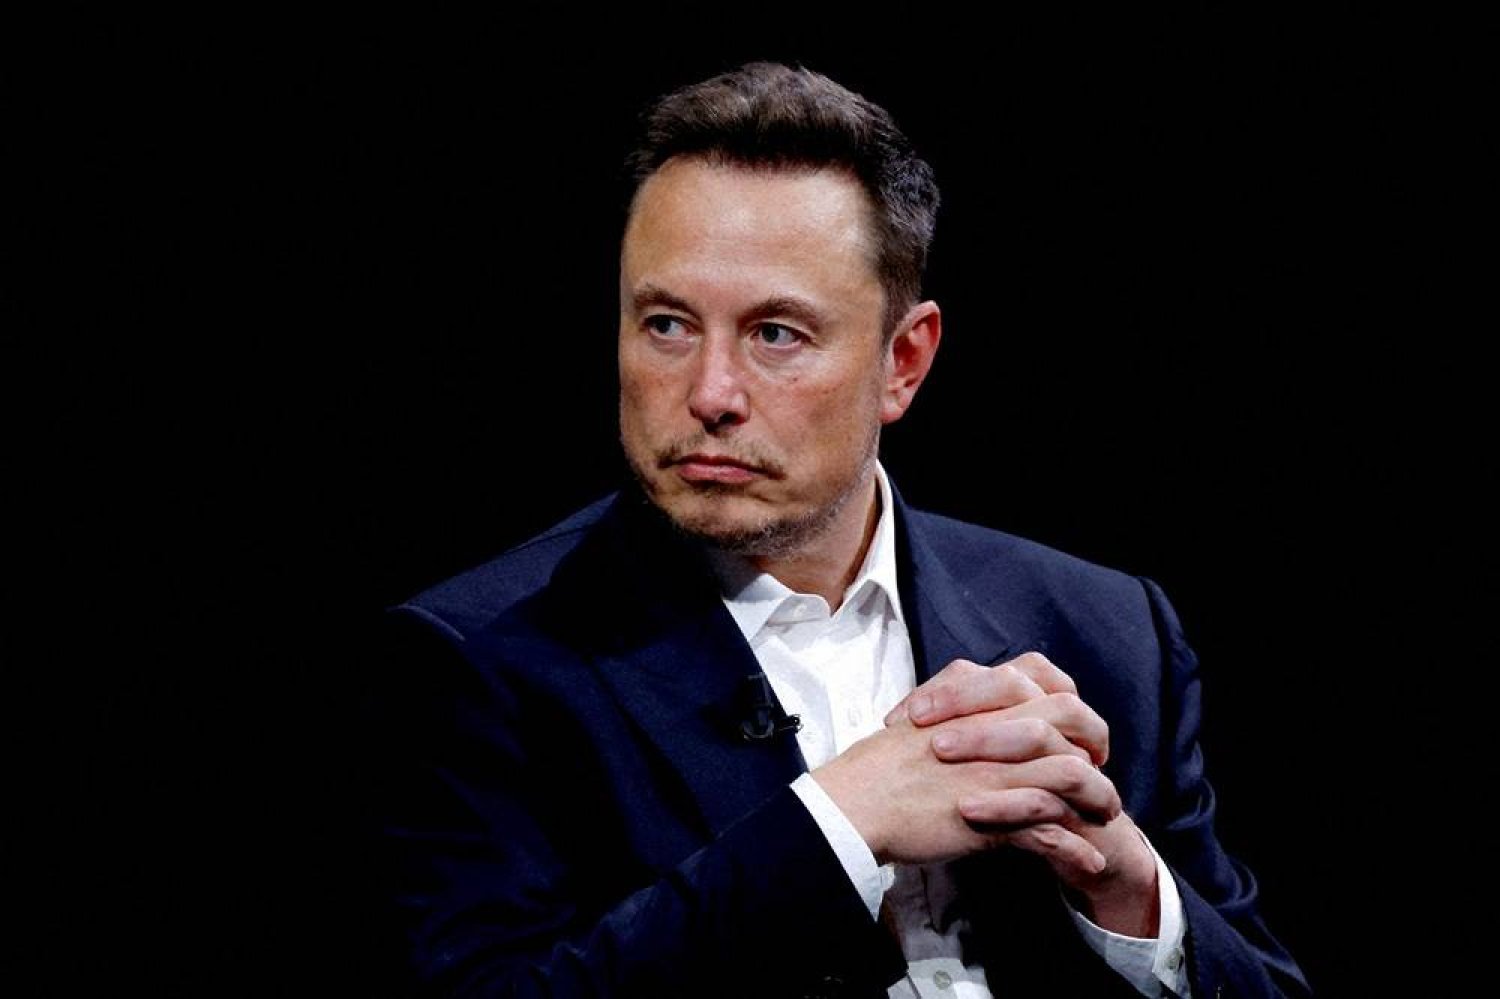 Elon Musk, CEO of SpaceX and Tesla and owner of X, formerly known as Twitter, attends the Viva Technology conference dedicated to innovation and startups at the Porte de Versailles exhibition center in Paris, France, June 16, 2023. (Reuters)